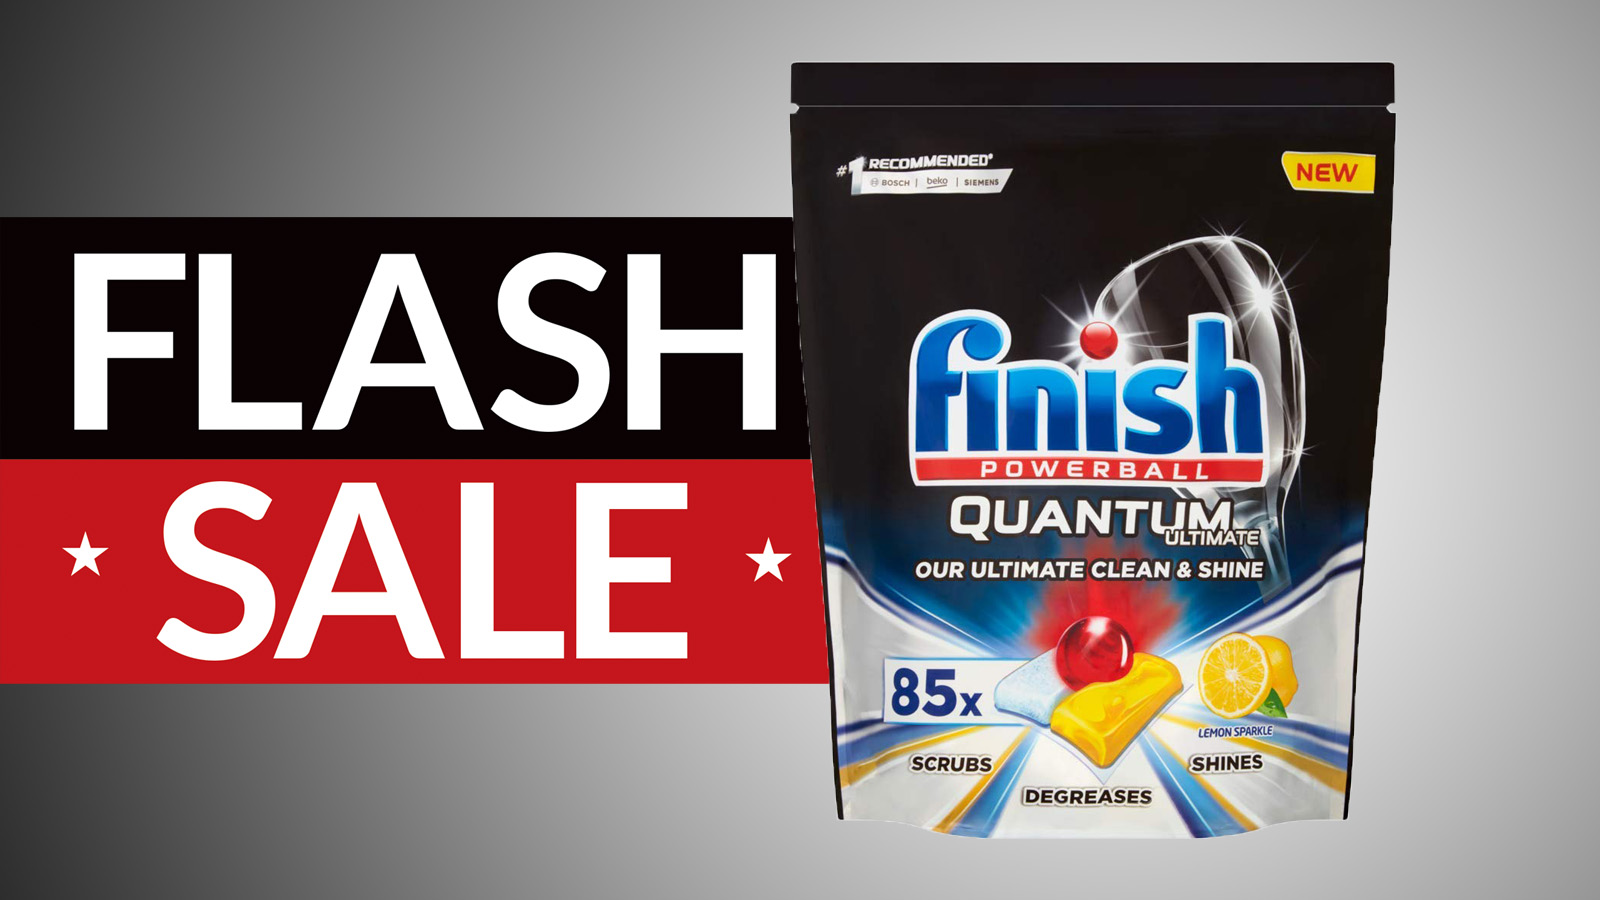 The best dishwasher tablets, Finish Quantum Ultimate, are now better than  half price